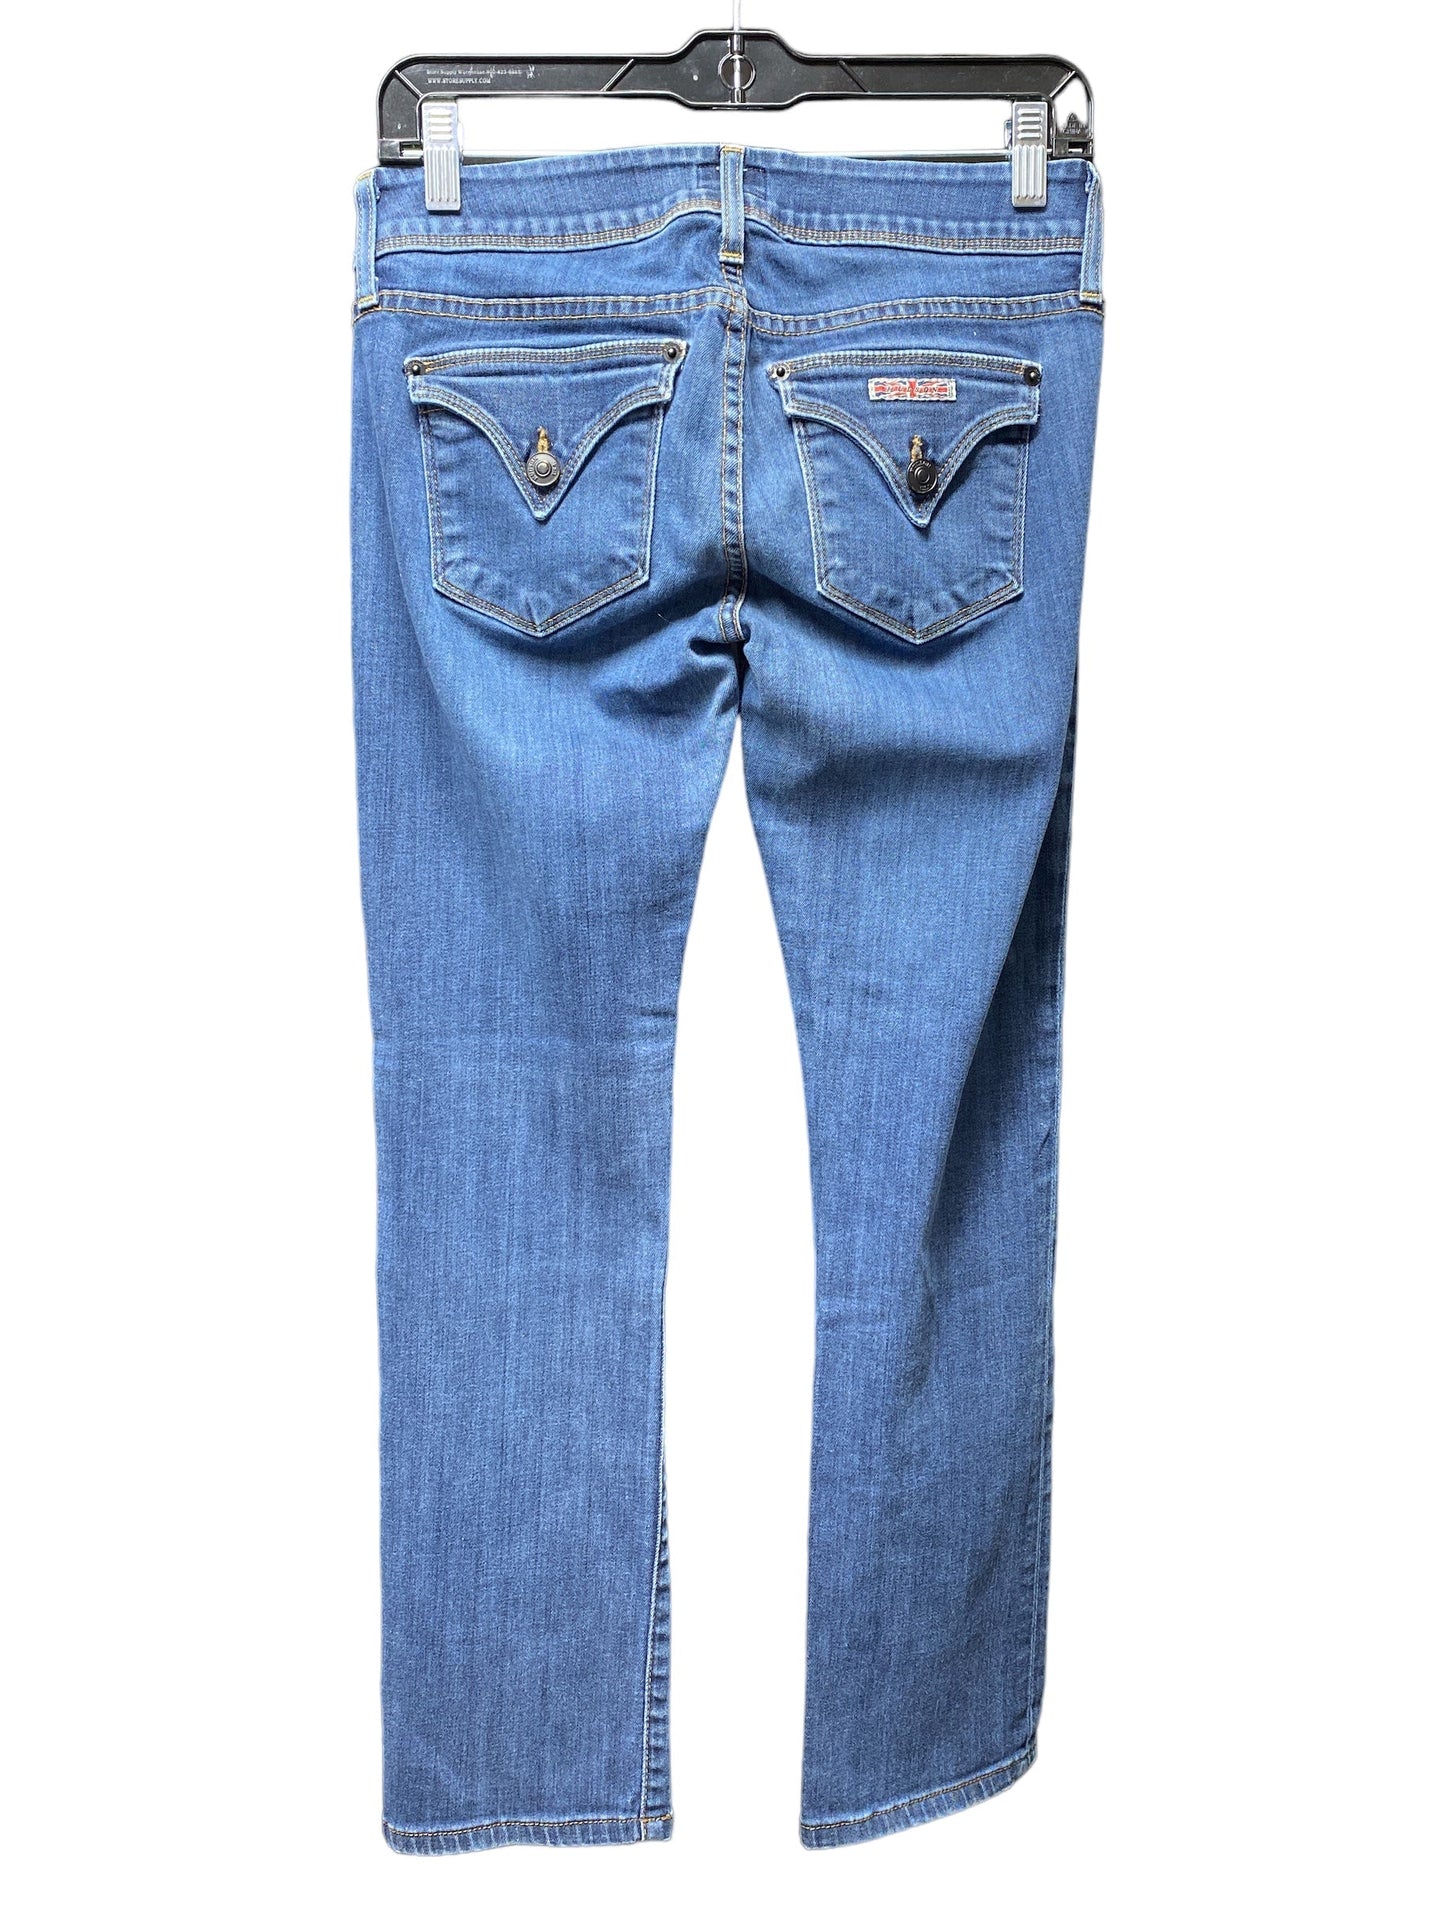 Jeans Straight By Hudson  Size: 2